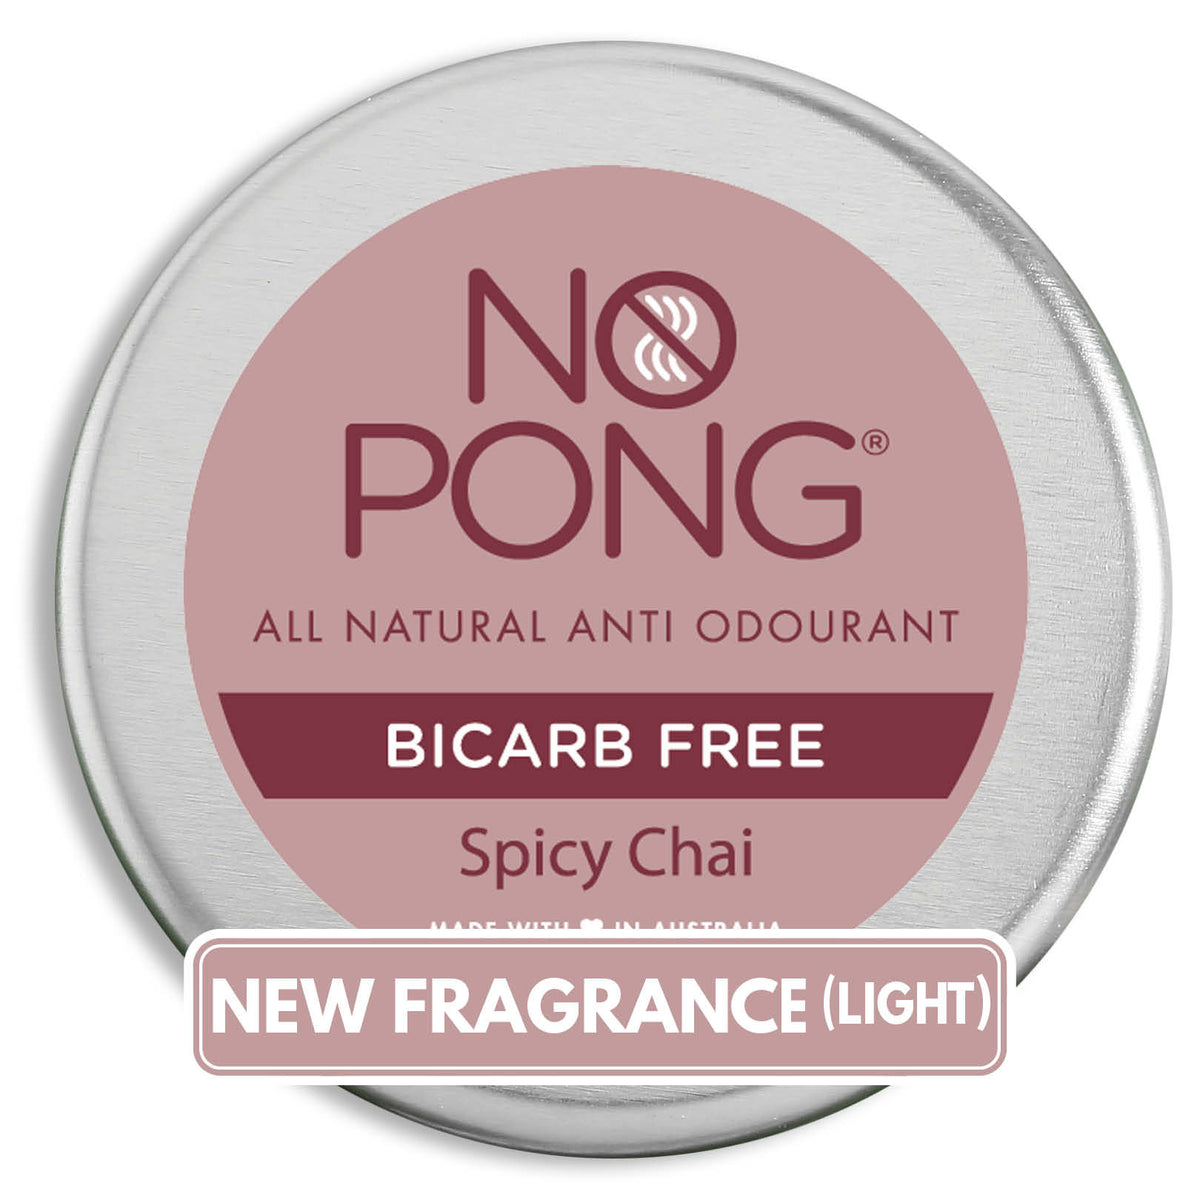 No Pong ORIGINAL SPICY CHAI BICARB FREE  (Only available in studio)